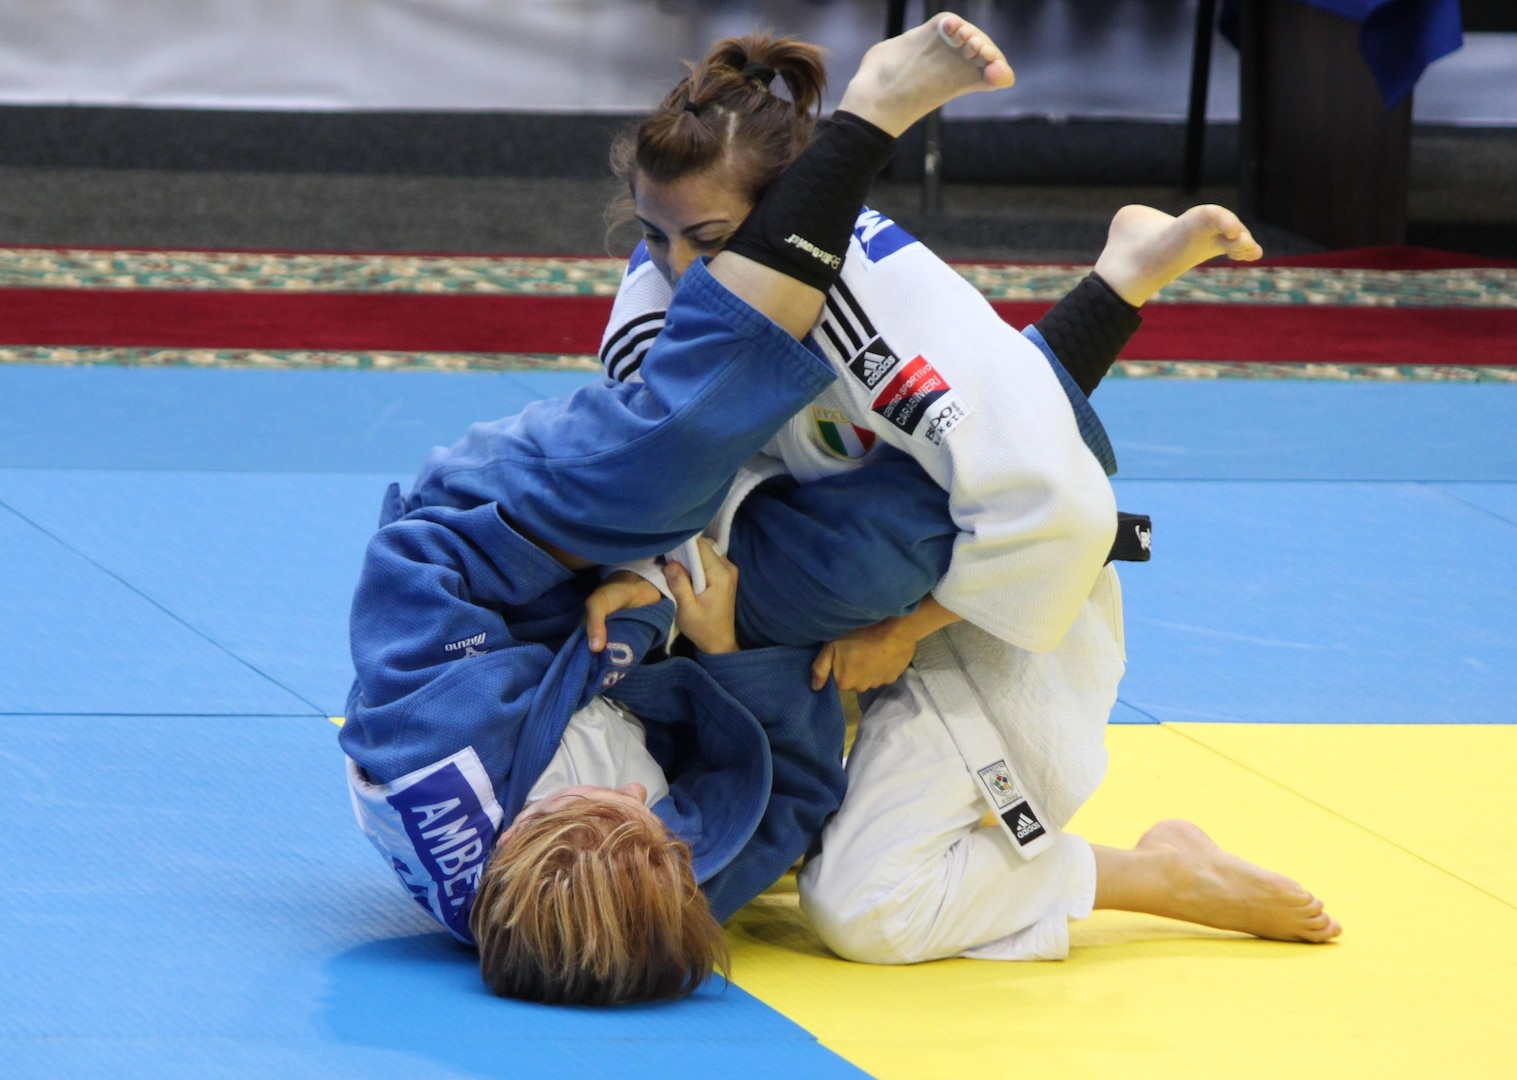 CPT Amber Jones (Missouri National Guard) (left) attempts an arm bar of her opponent at the 2013 CISM World Military Judo Championship in Astana, Kazakhstan 30 Jun to 7 July.